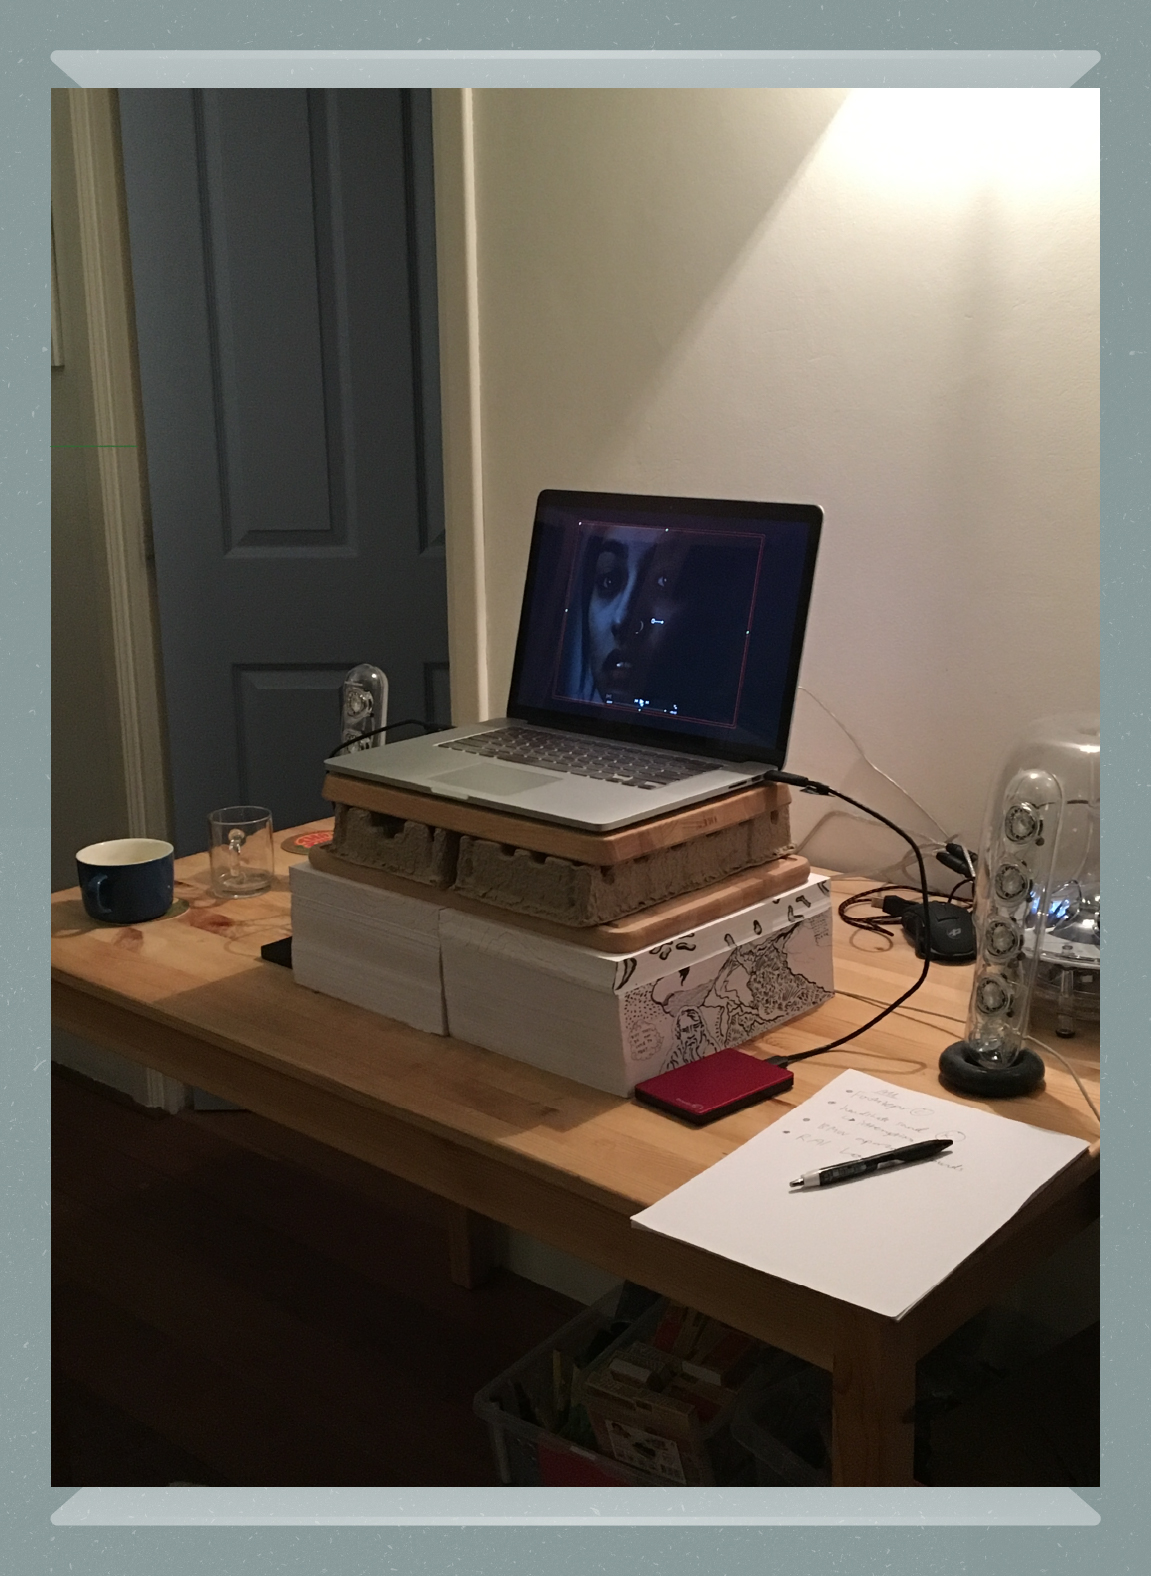 A makeshift standing desk setup that Chong Lii created back in 2017 for editing the film